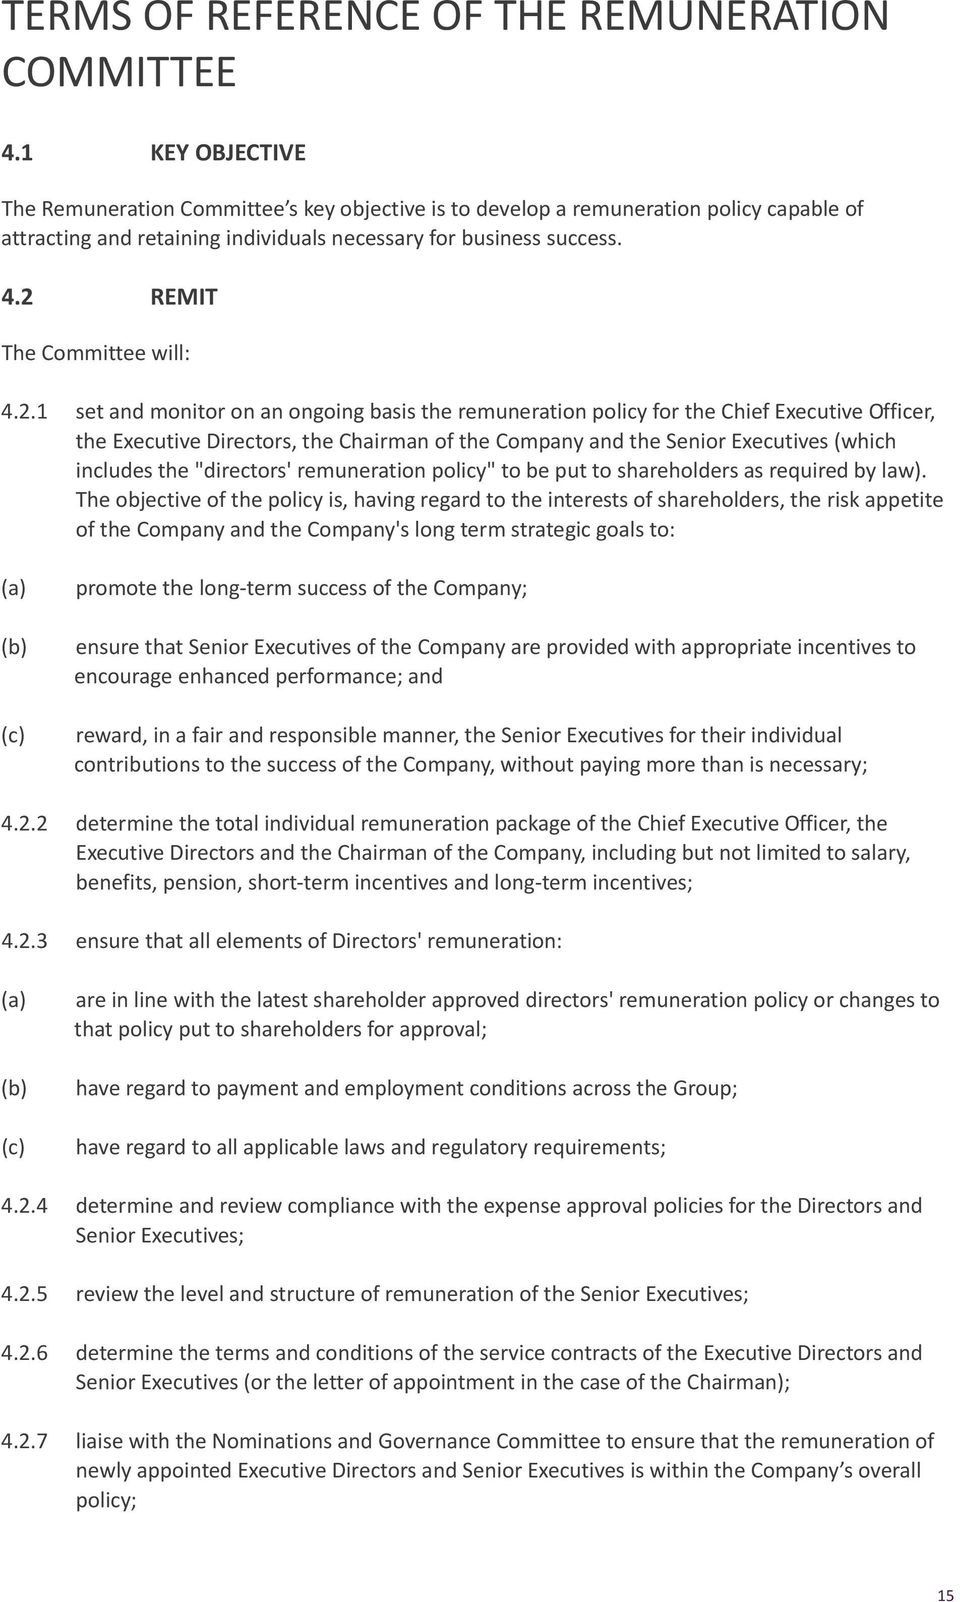 2 REMIT The Committee will: 4.2.1 set and monitor on an ongoing basis the remuneration policy for the Chief Executive Officer, the Executive Directors, the Chairman of the Company and the Senior